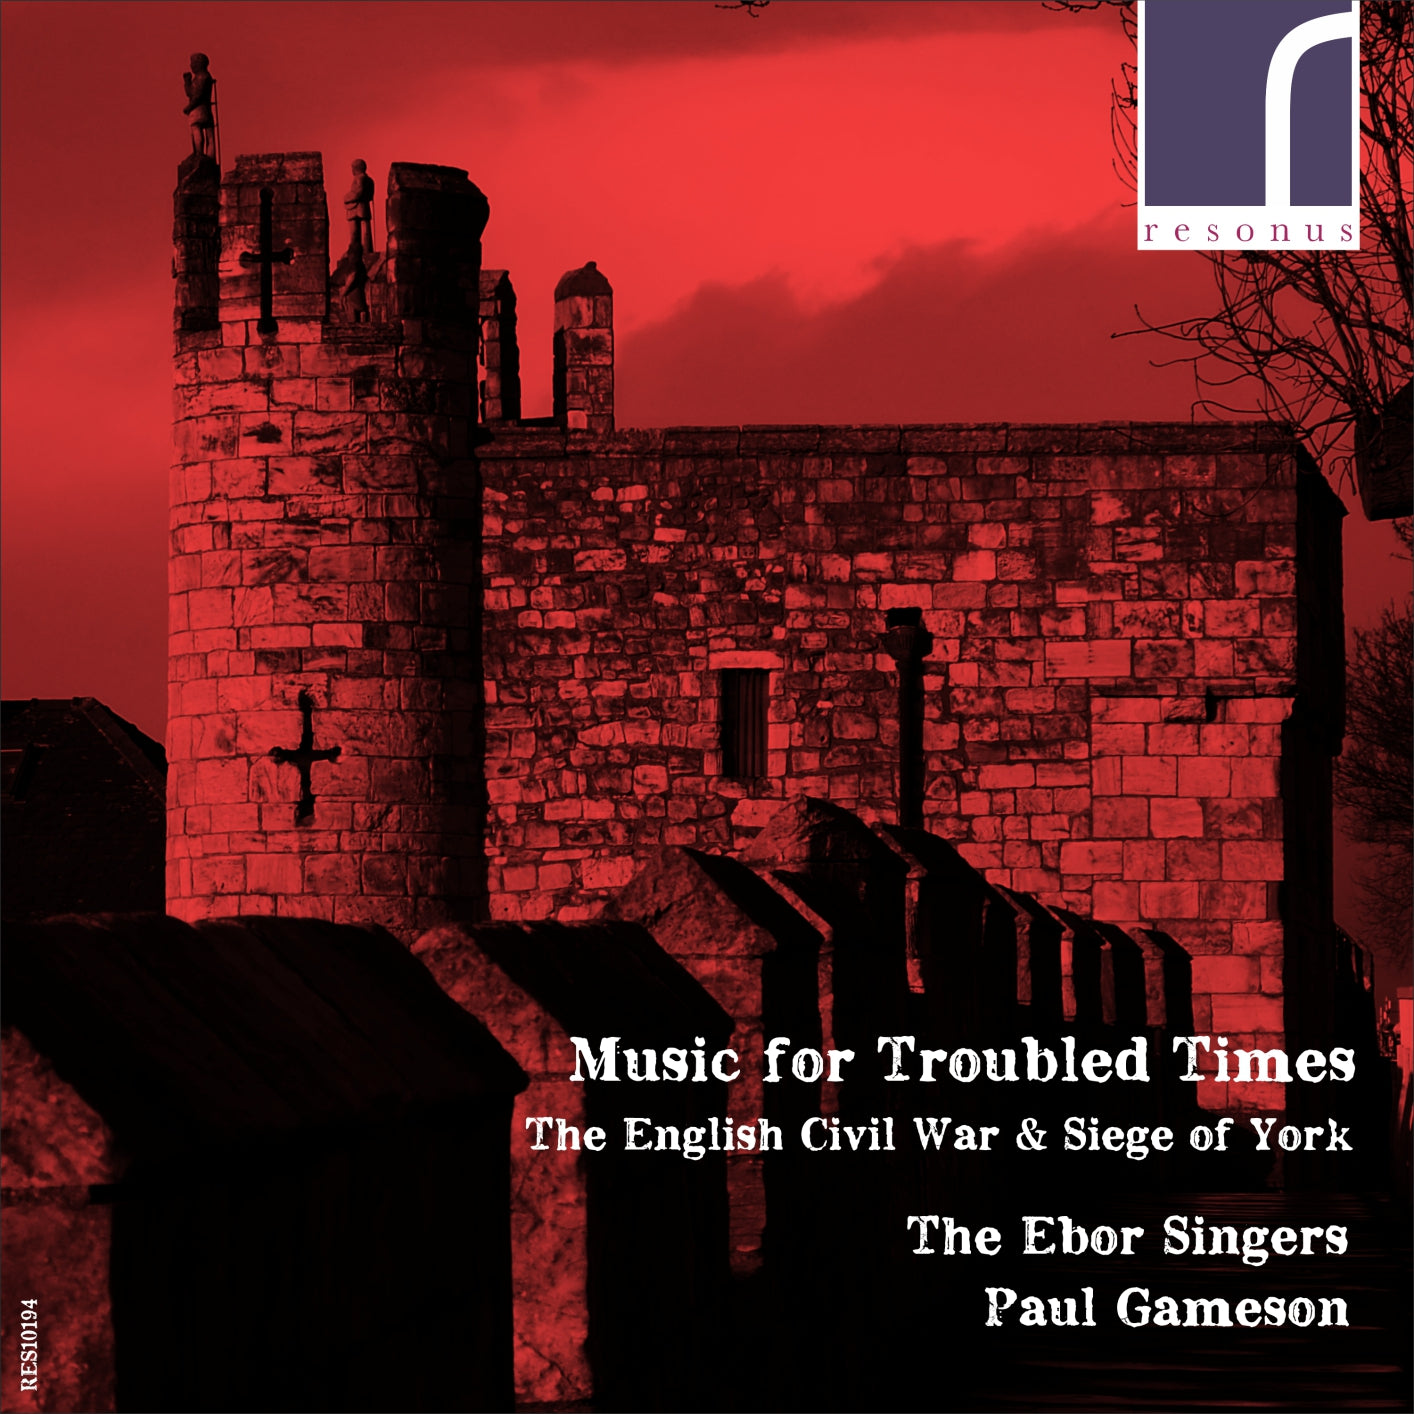 Music for Troubled Times: The English Civil War & Siege of York